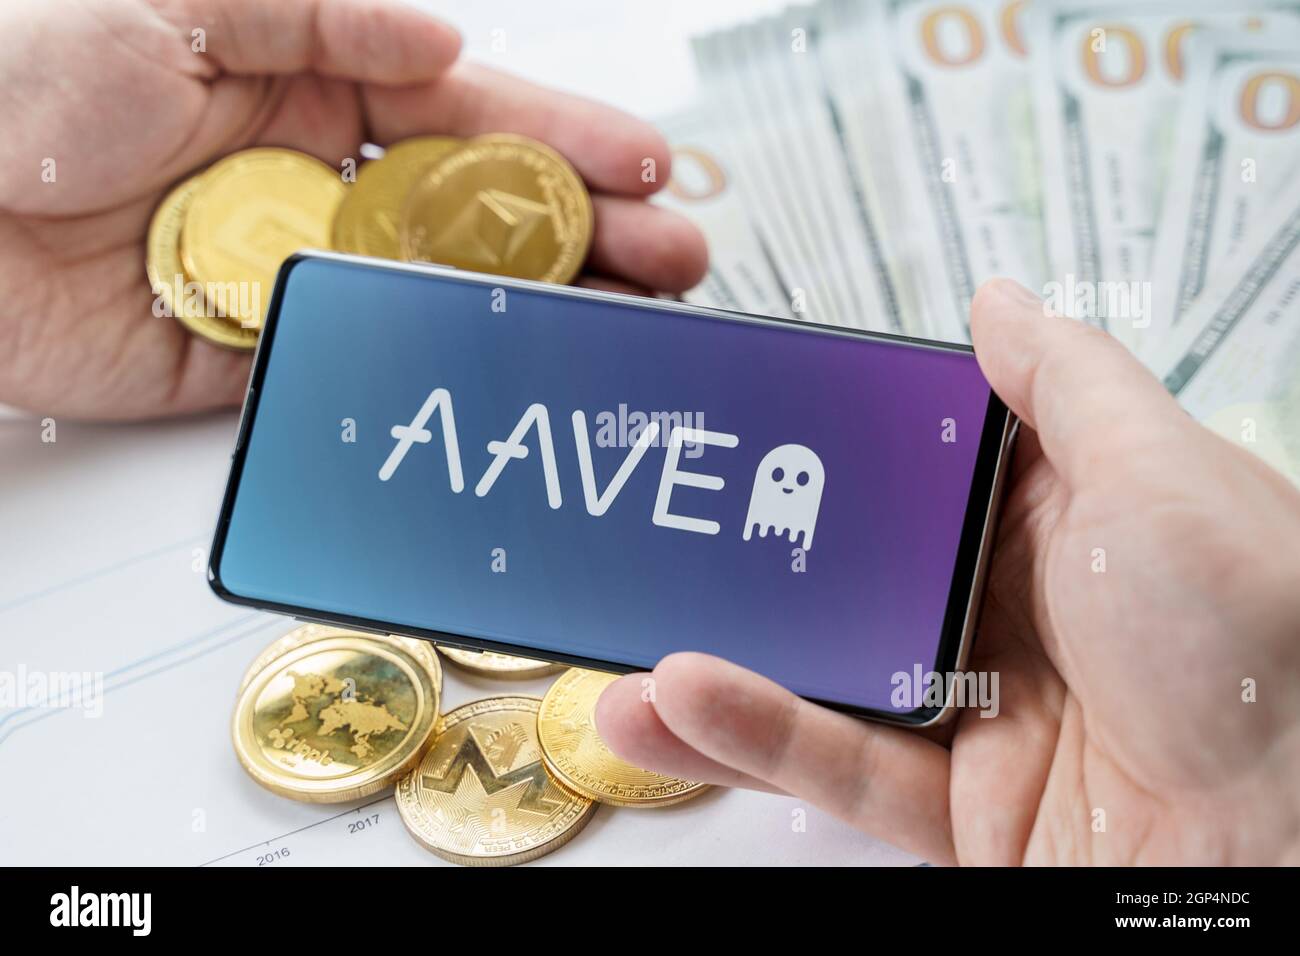 Russia Moscow 20.05.2021 AAVE logo in mobile phone. Open Source Liquidity DEX Protocol. Cryptocurrency decentralized exchange. Trading blockchain plat Stock Photo